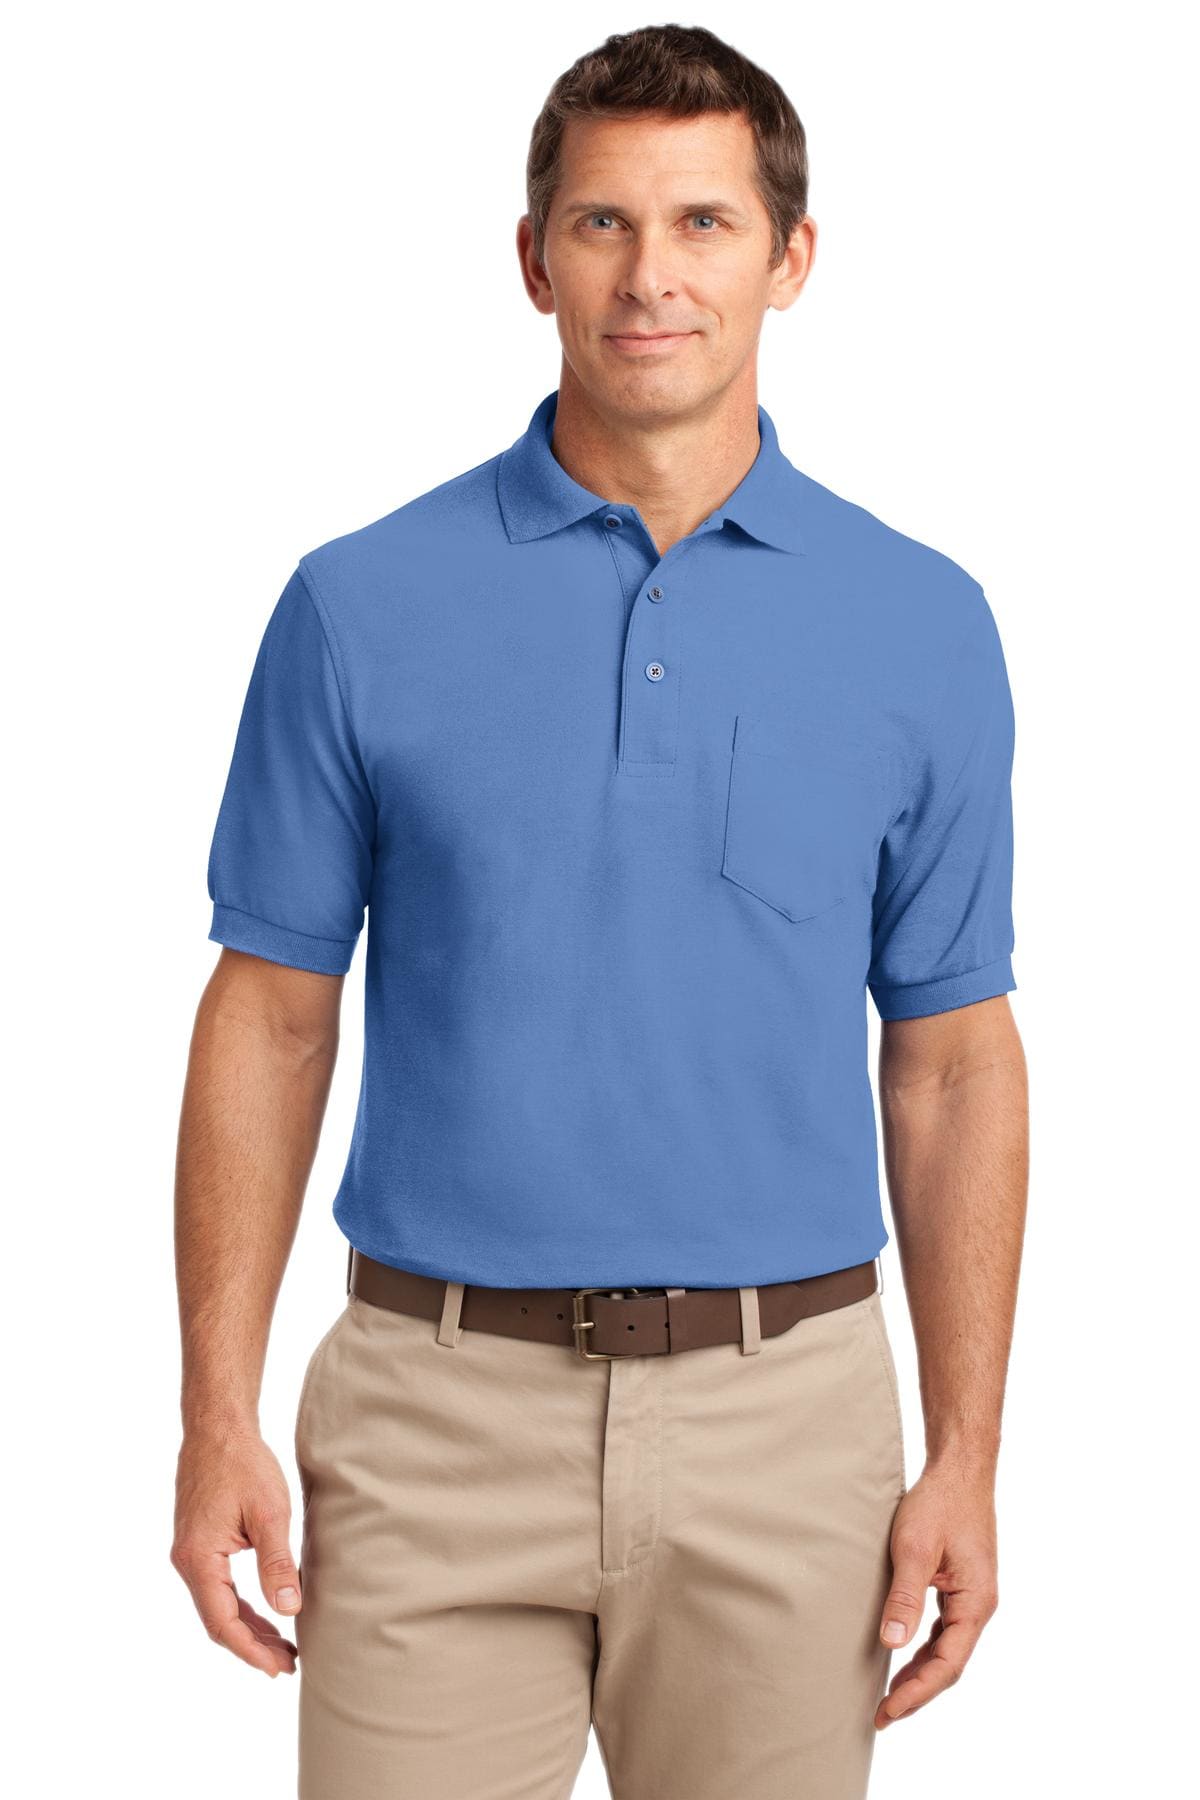 Port Authority Tall Silk Touch’ Polo With Pocket. Tlk500p - Activewear / Shirts